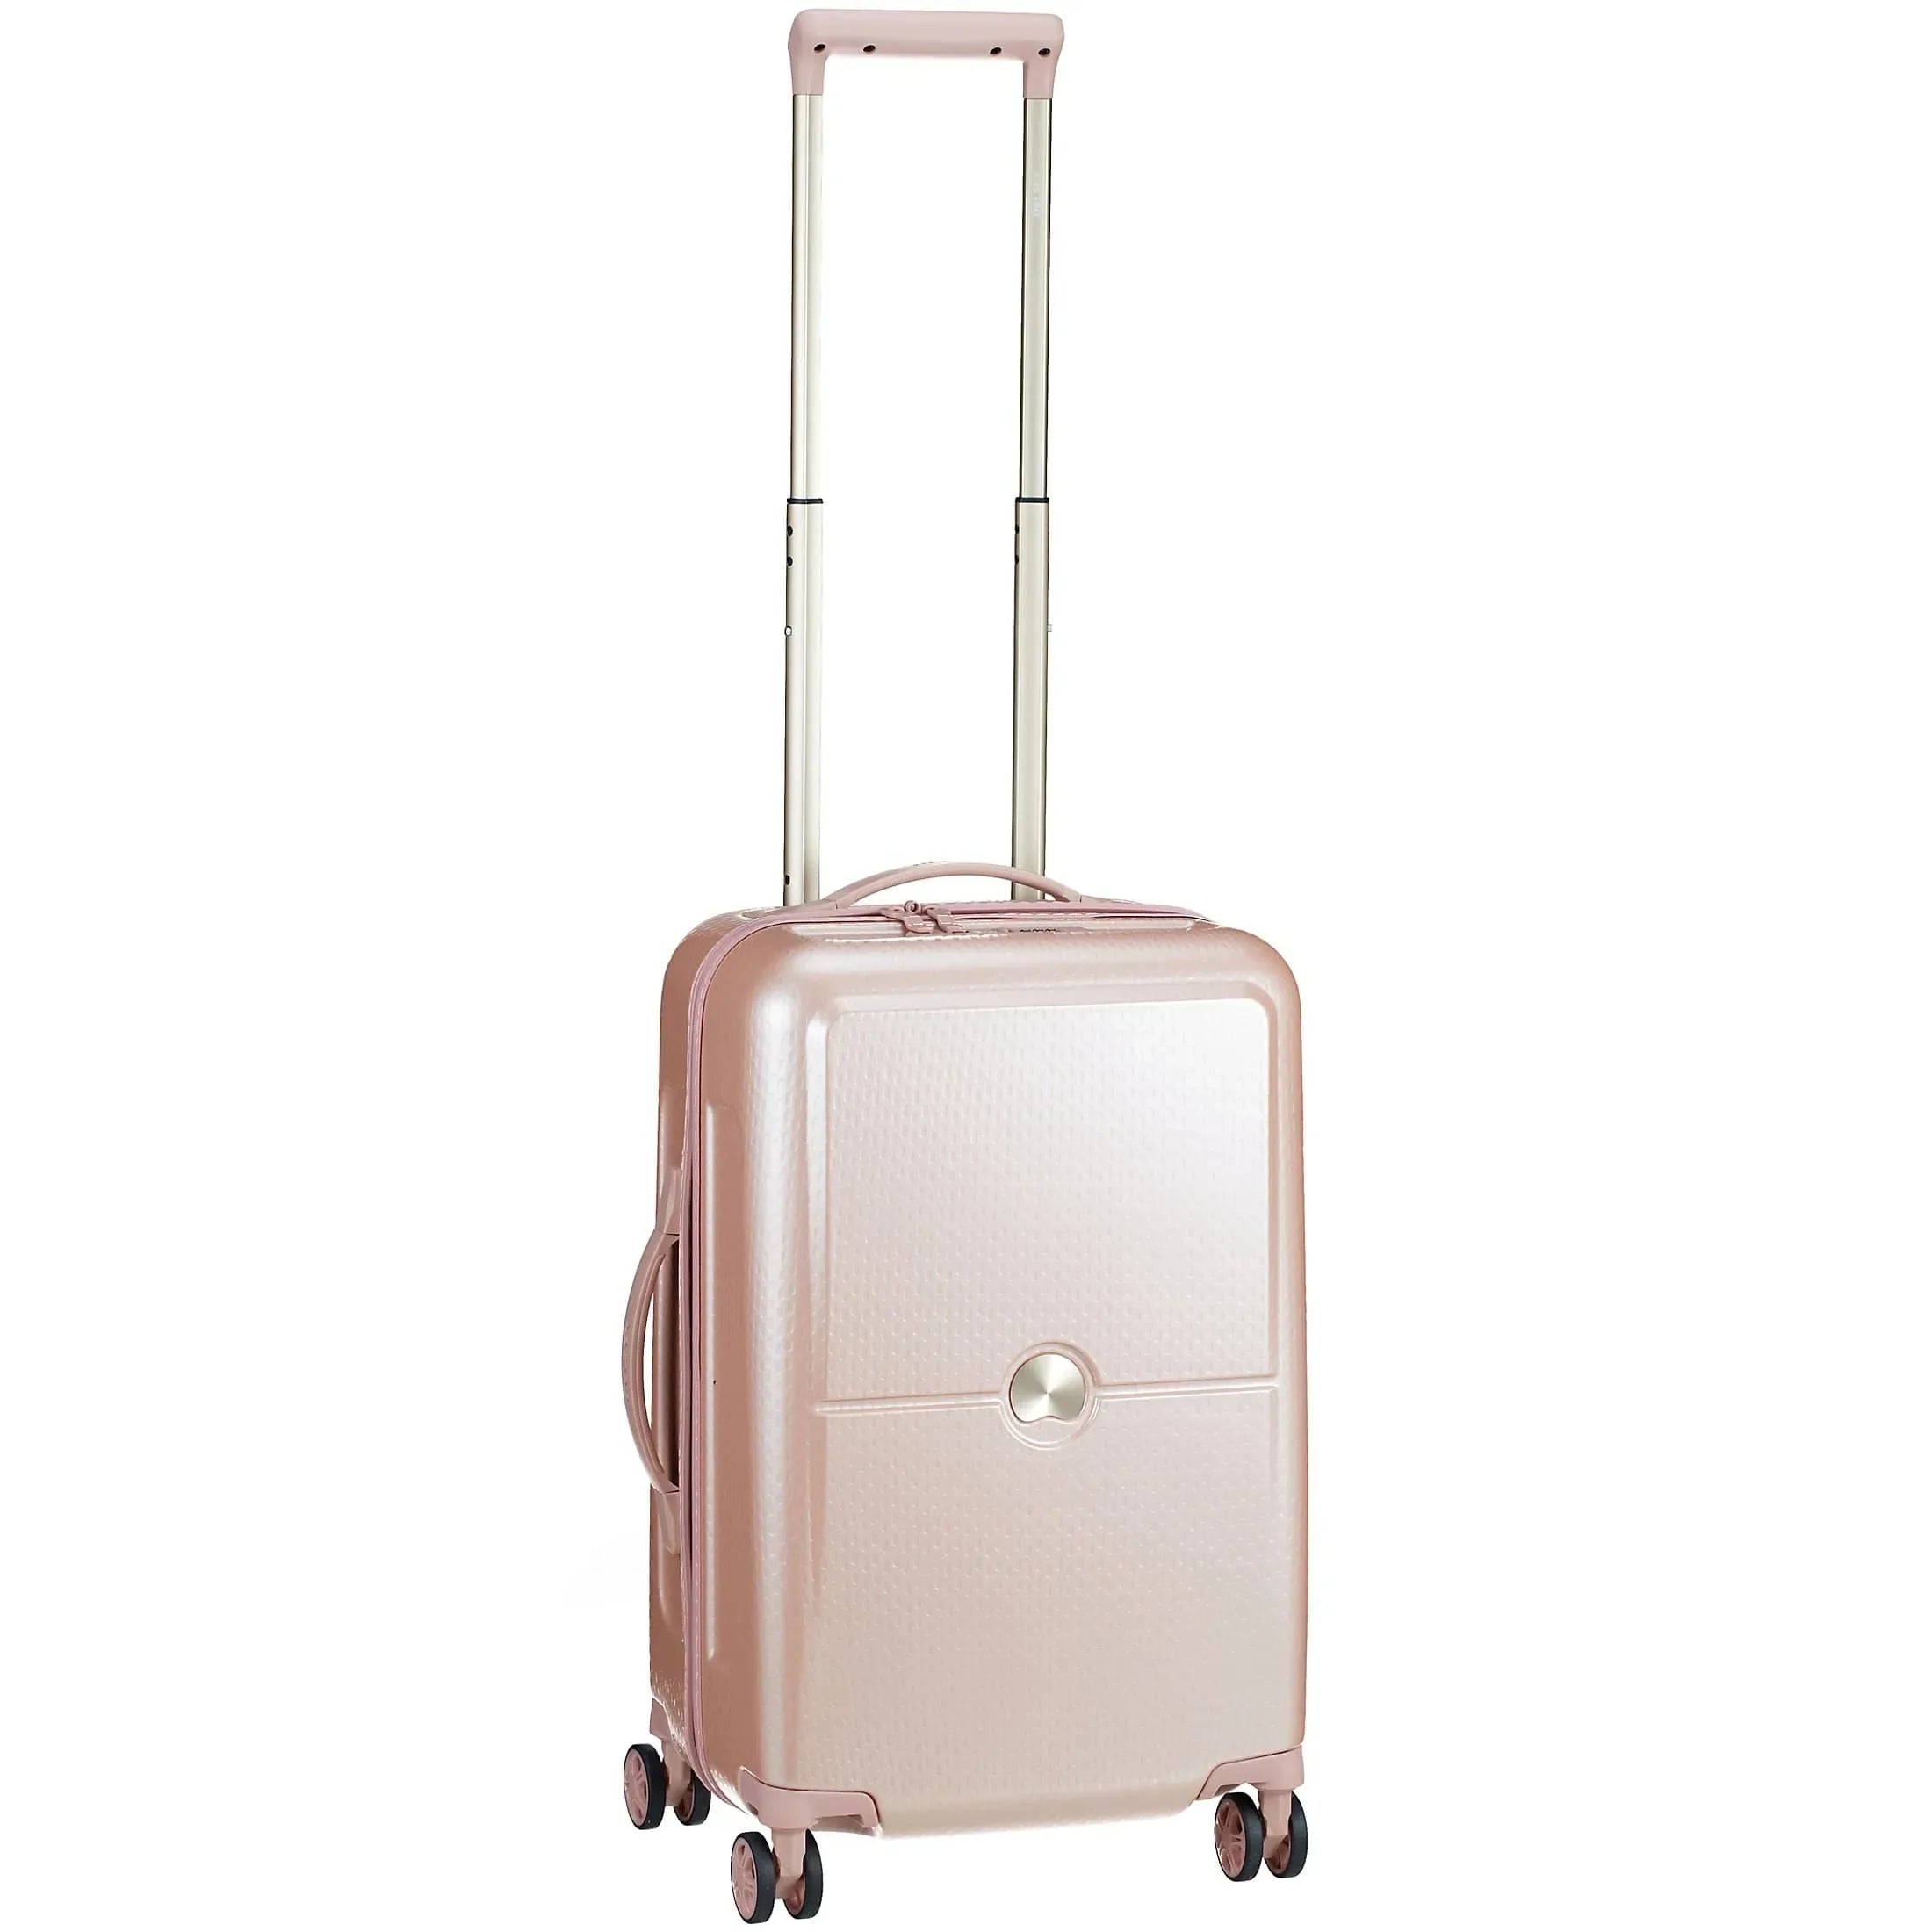 Delsey Turenne 4-roll cabin trolley 55 cm - paonie